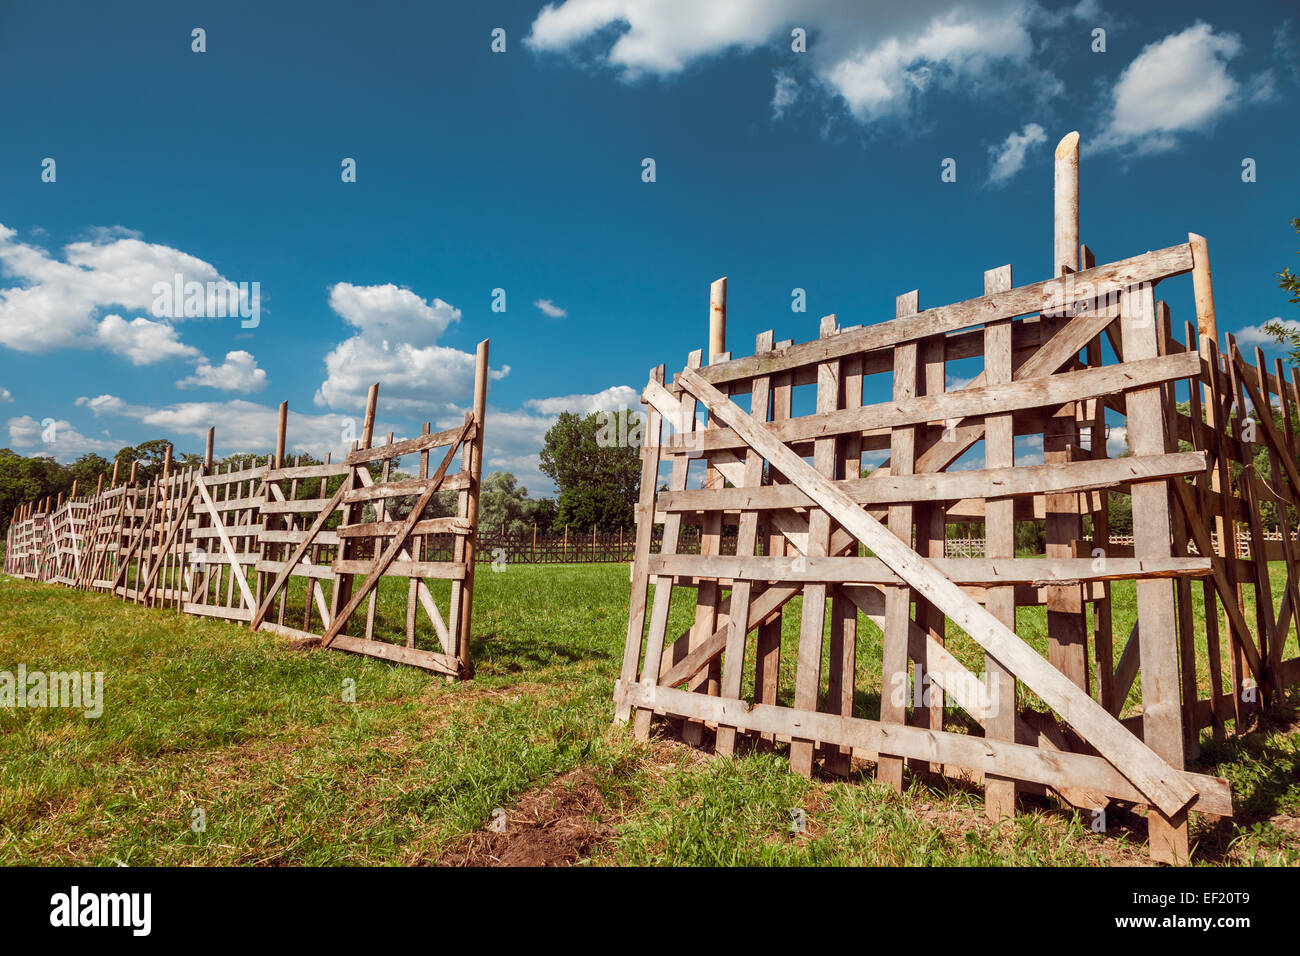 wooden rustic fence, blue sky and village landscape Stock Photo